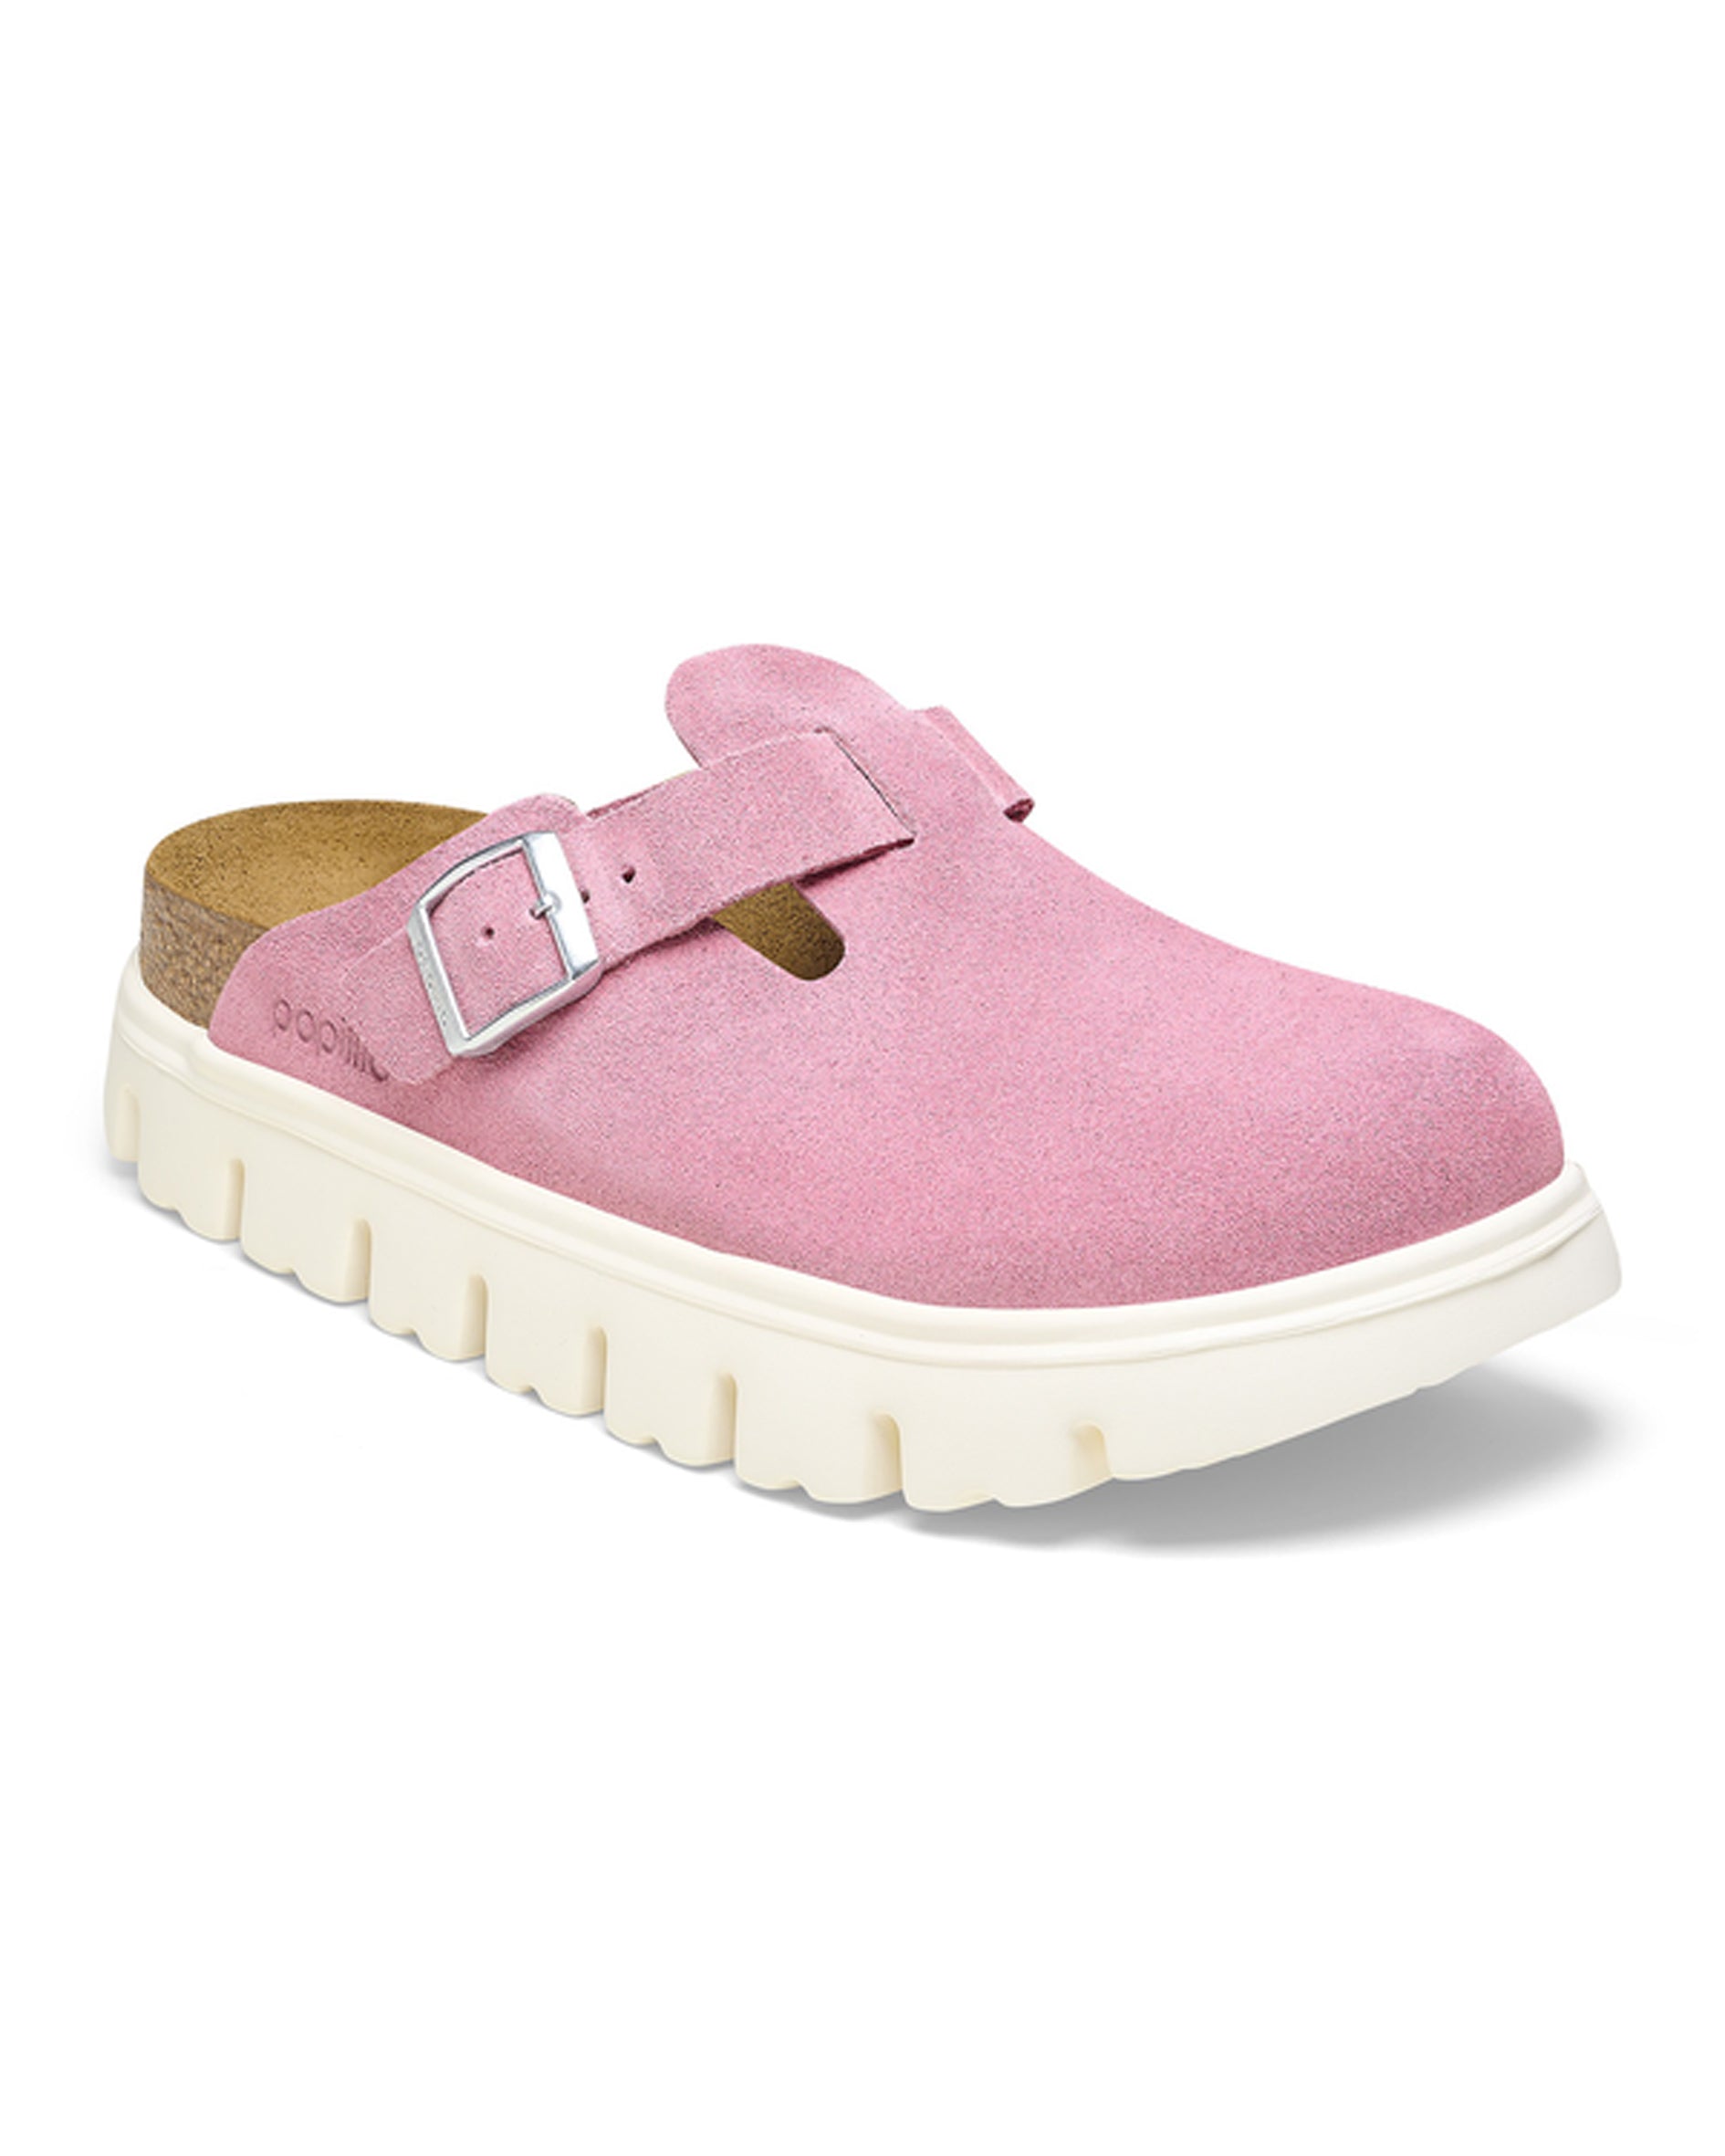 Boston Chunky Candy Pink Suede Leather Clogs